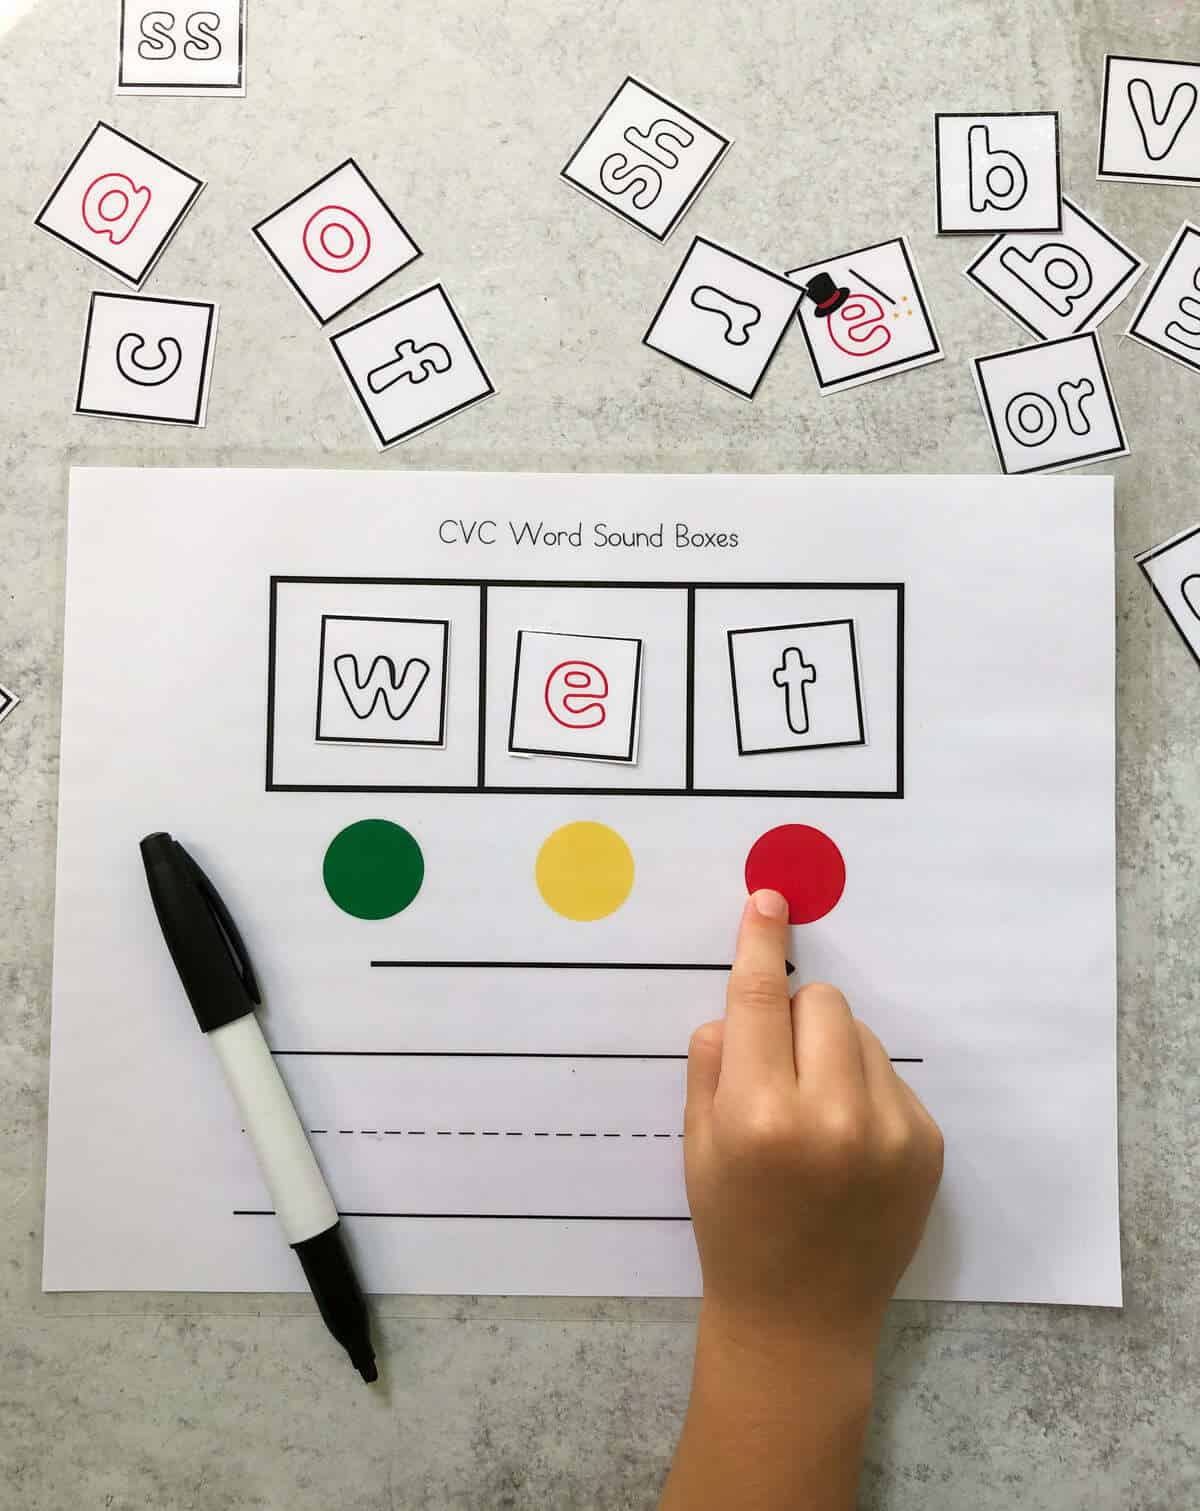 A child's hand mapping the word "wet" using sound boxes.